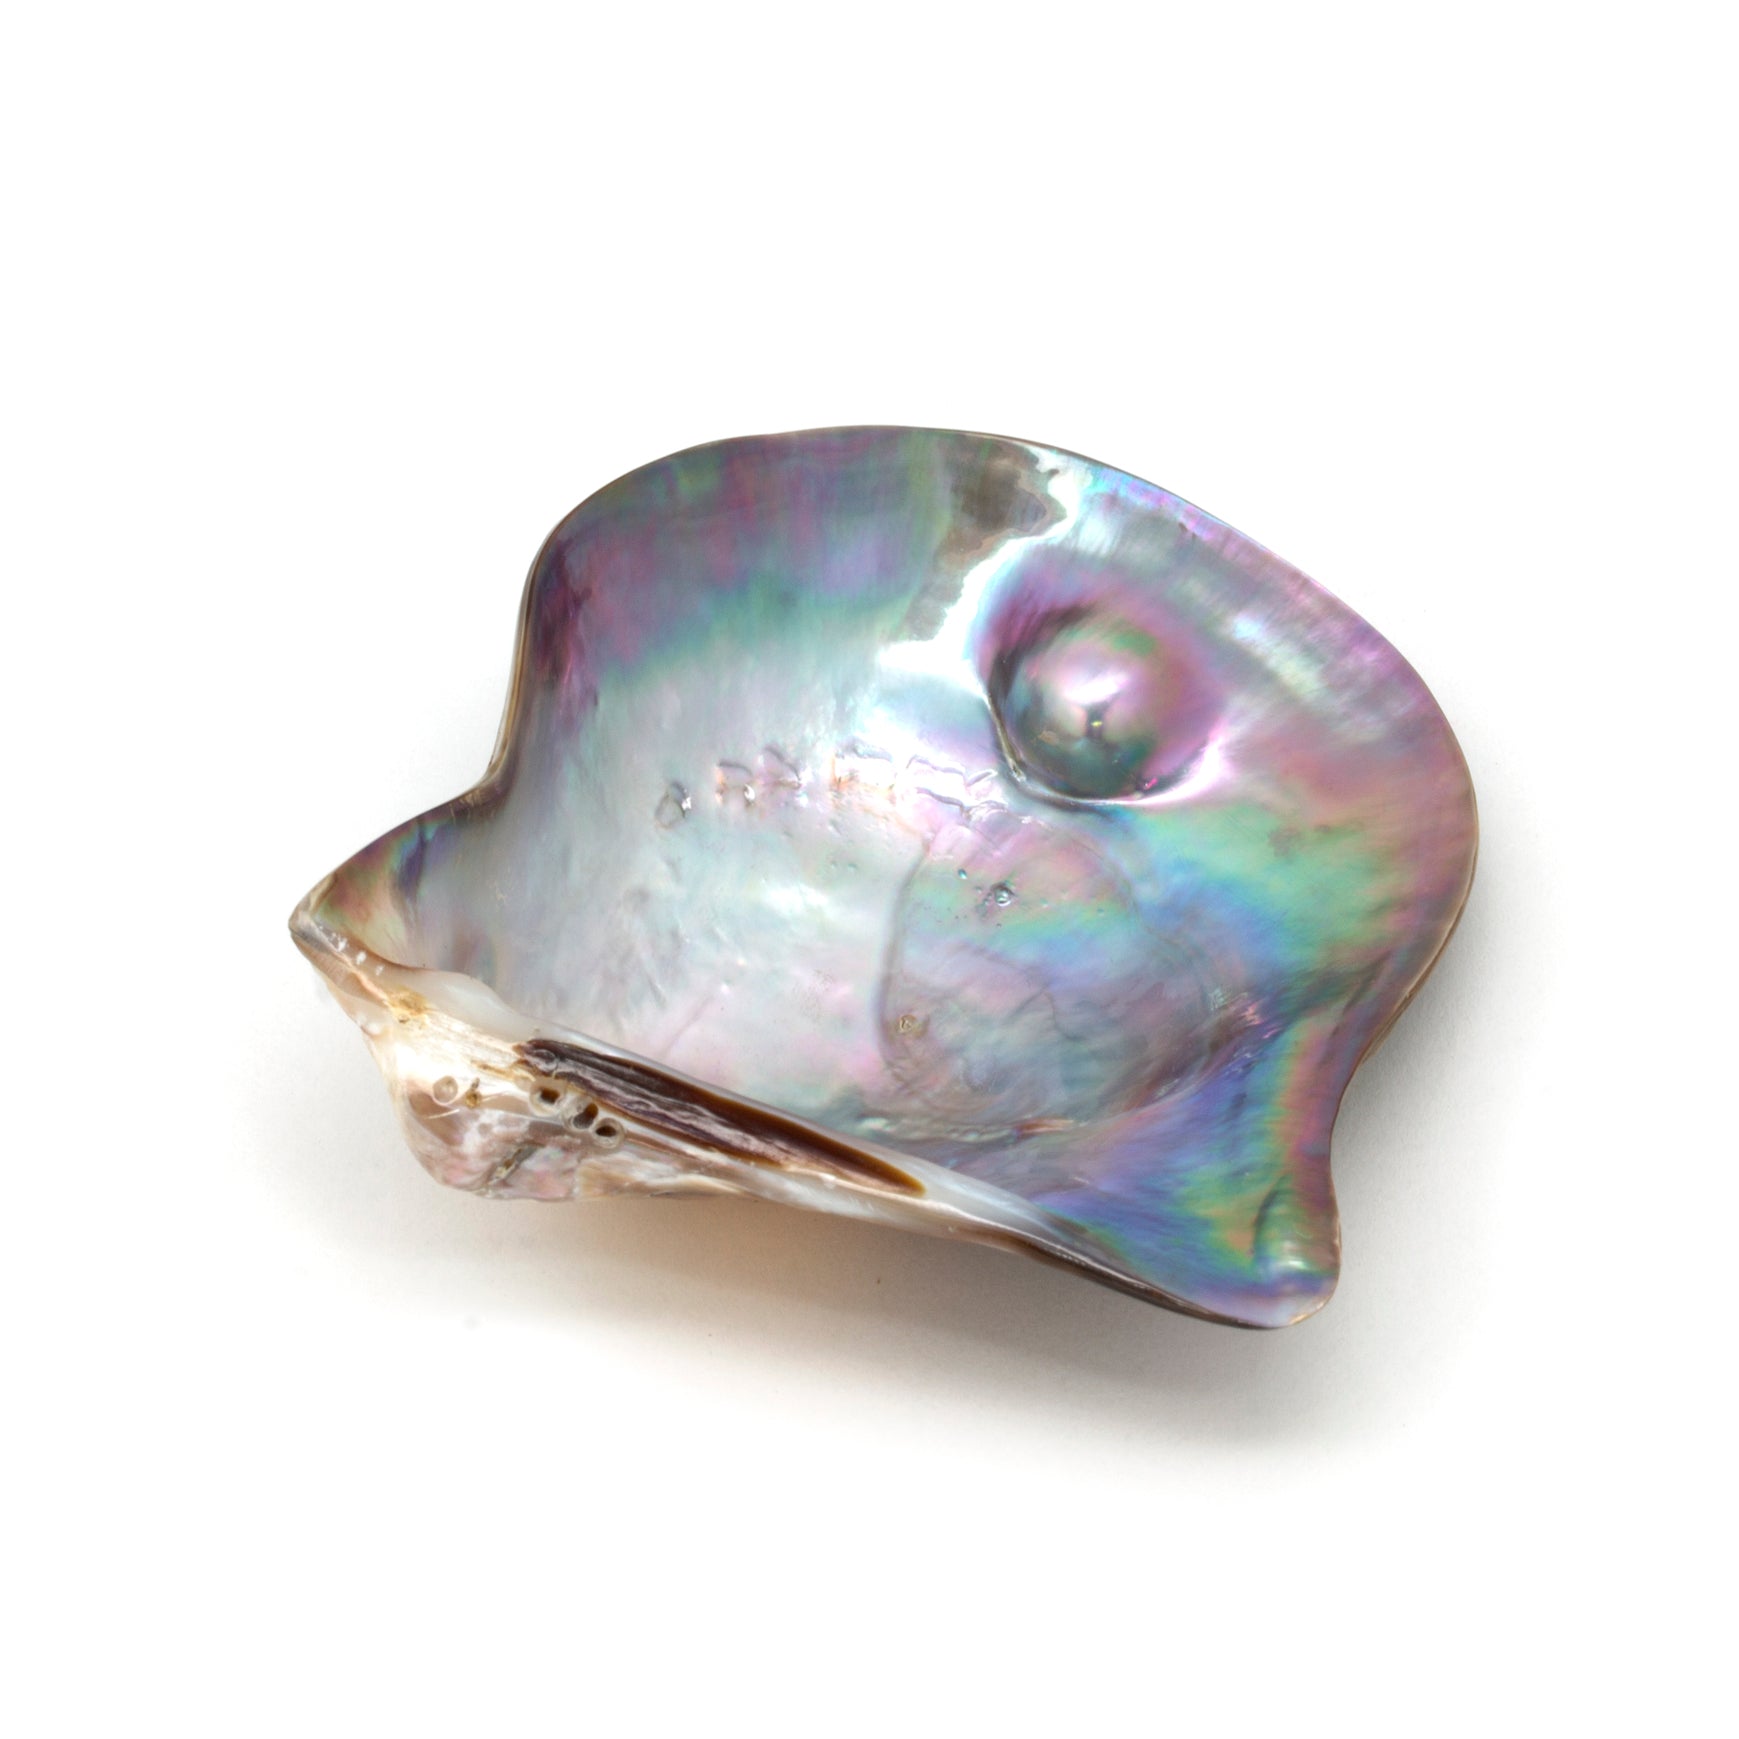 Polished "Rainbow Lip" Shell (Pteria sterna) from the Sea of Cortez